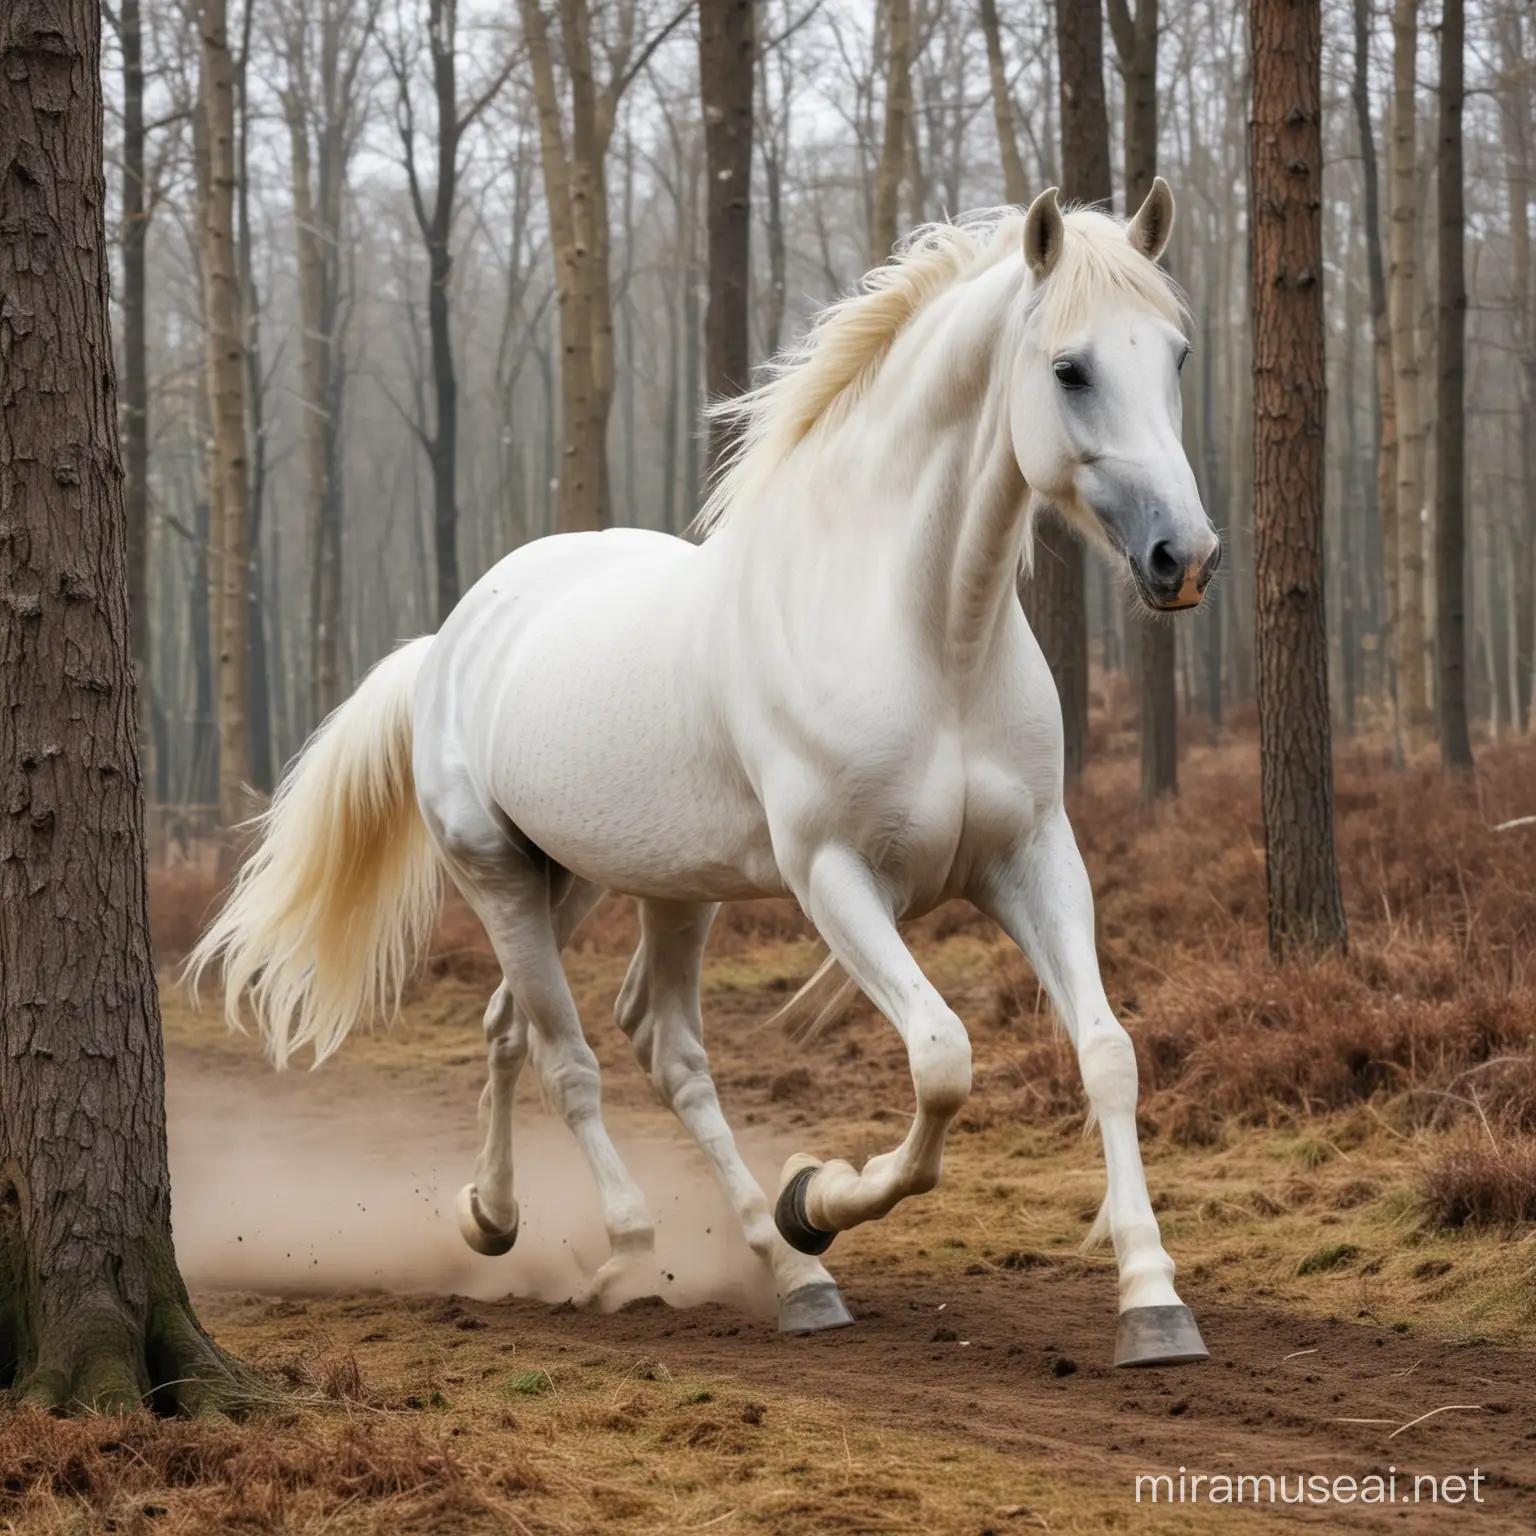 Majestic White Horse Galloping Through Enchanted Forest